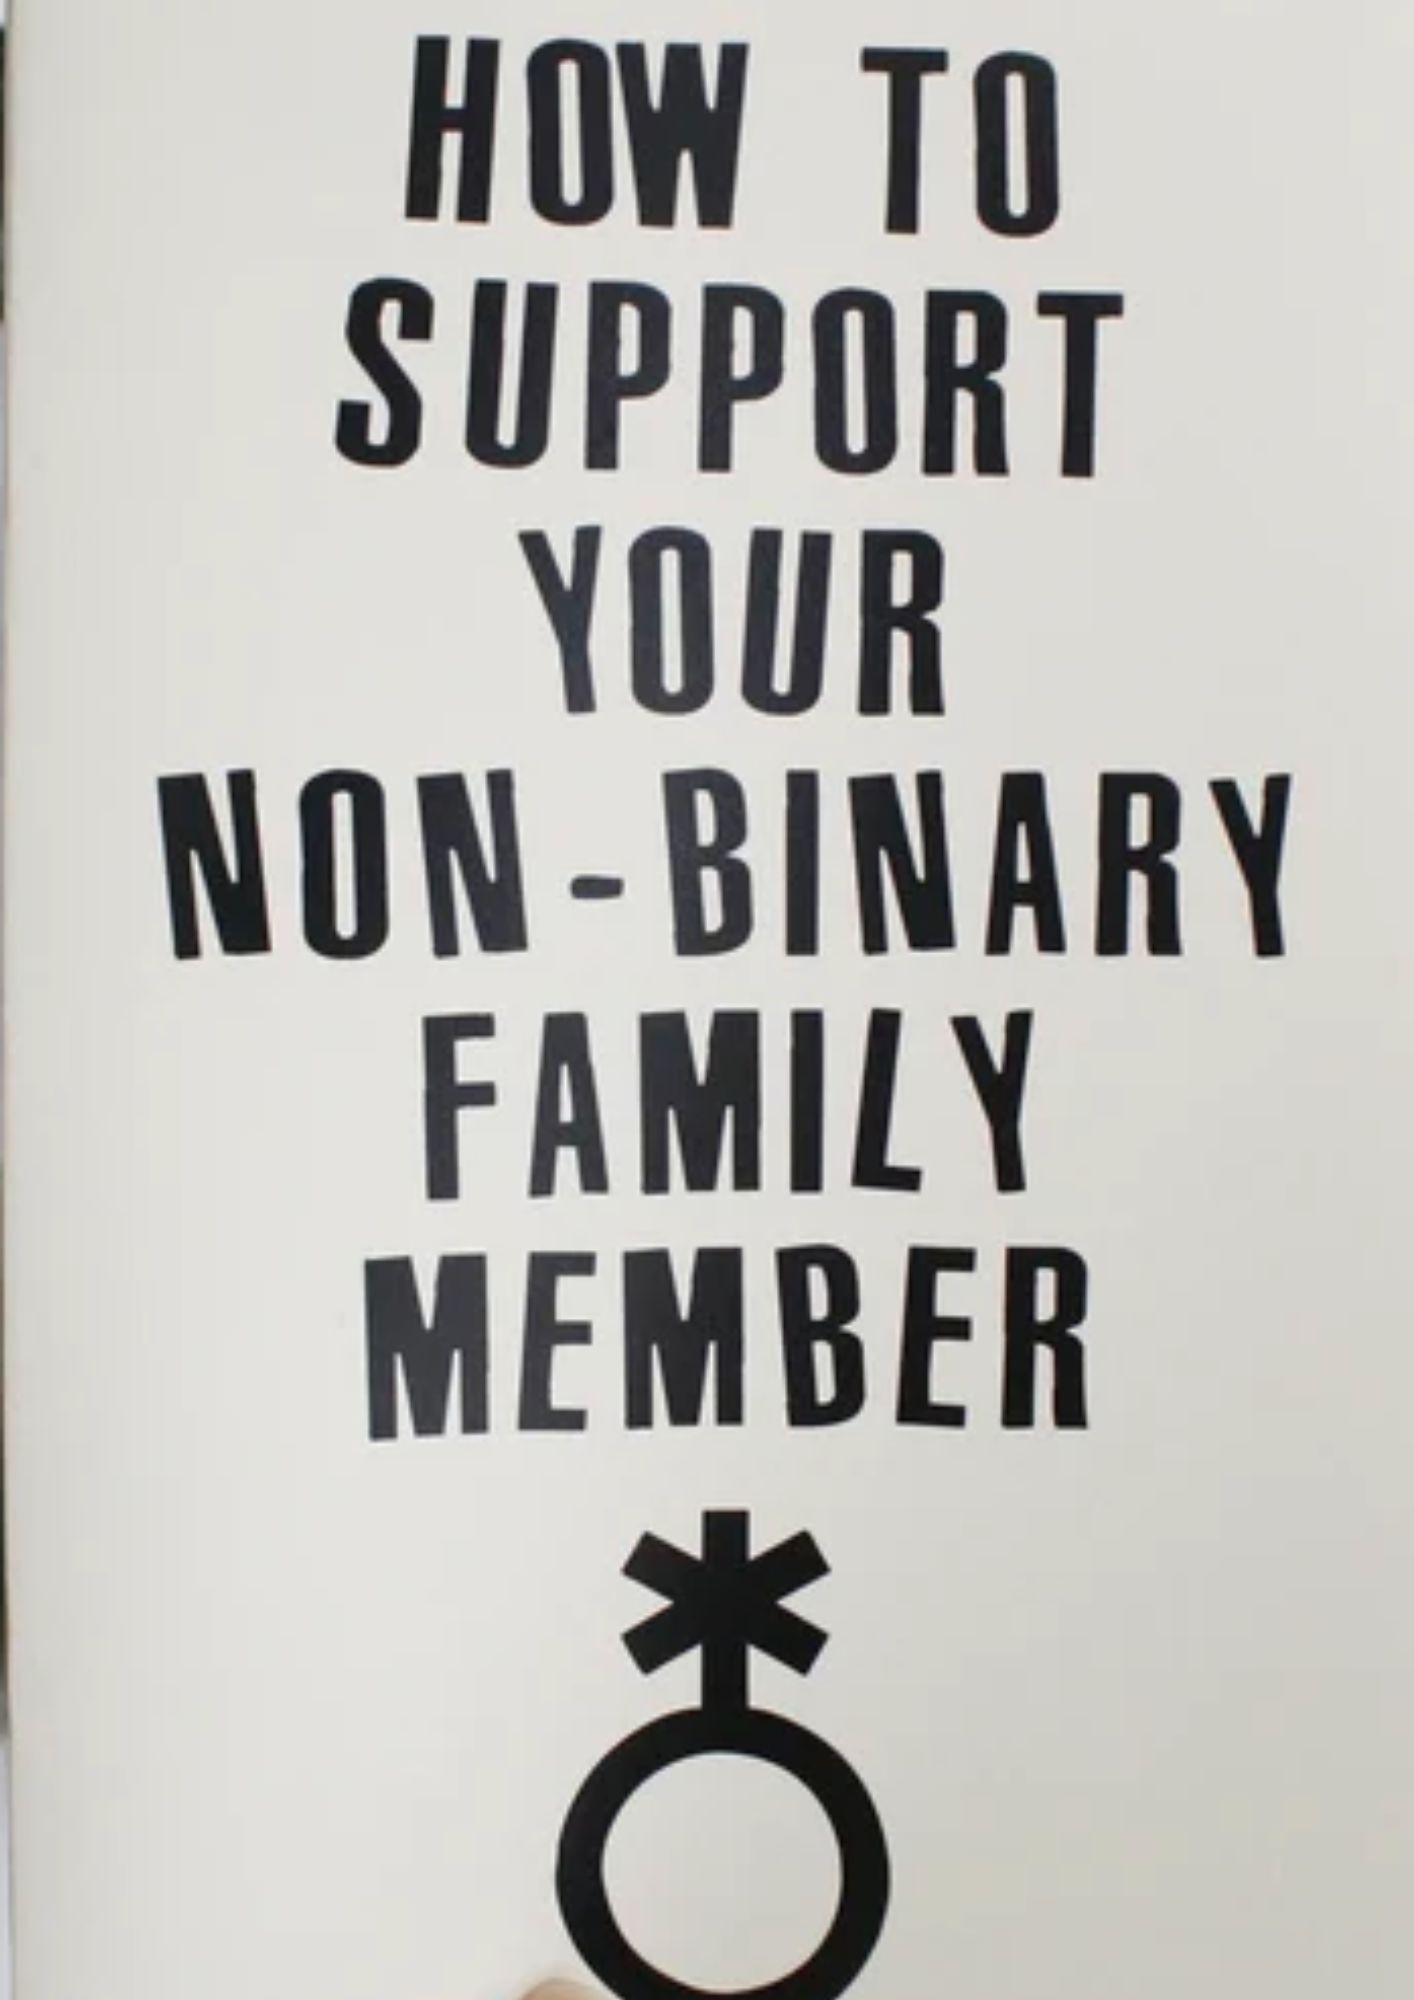 How to Support Your Non-Binary Family Member